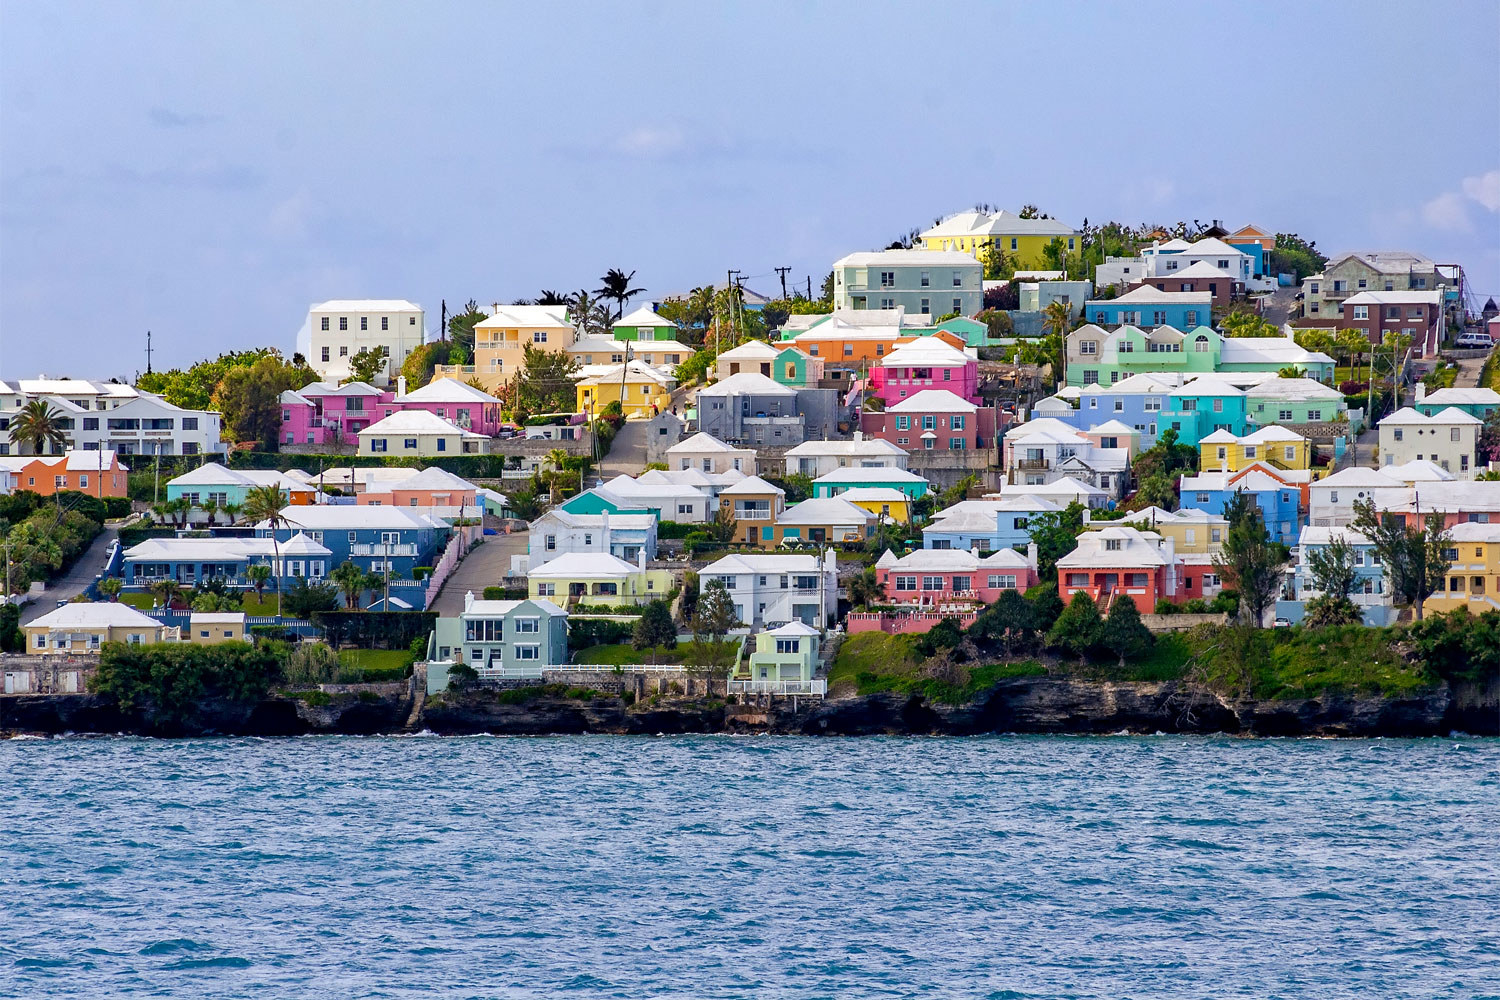 Colorful homes looking over the sea.